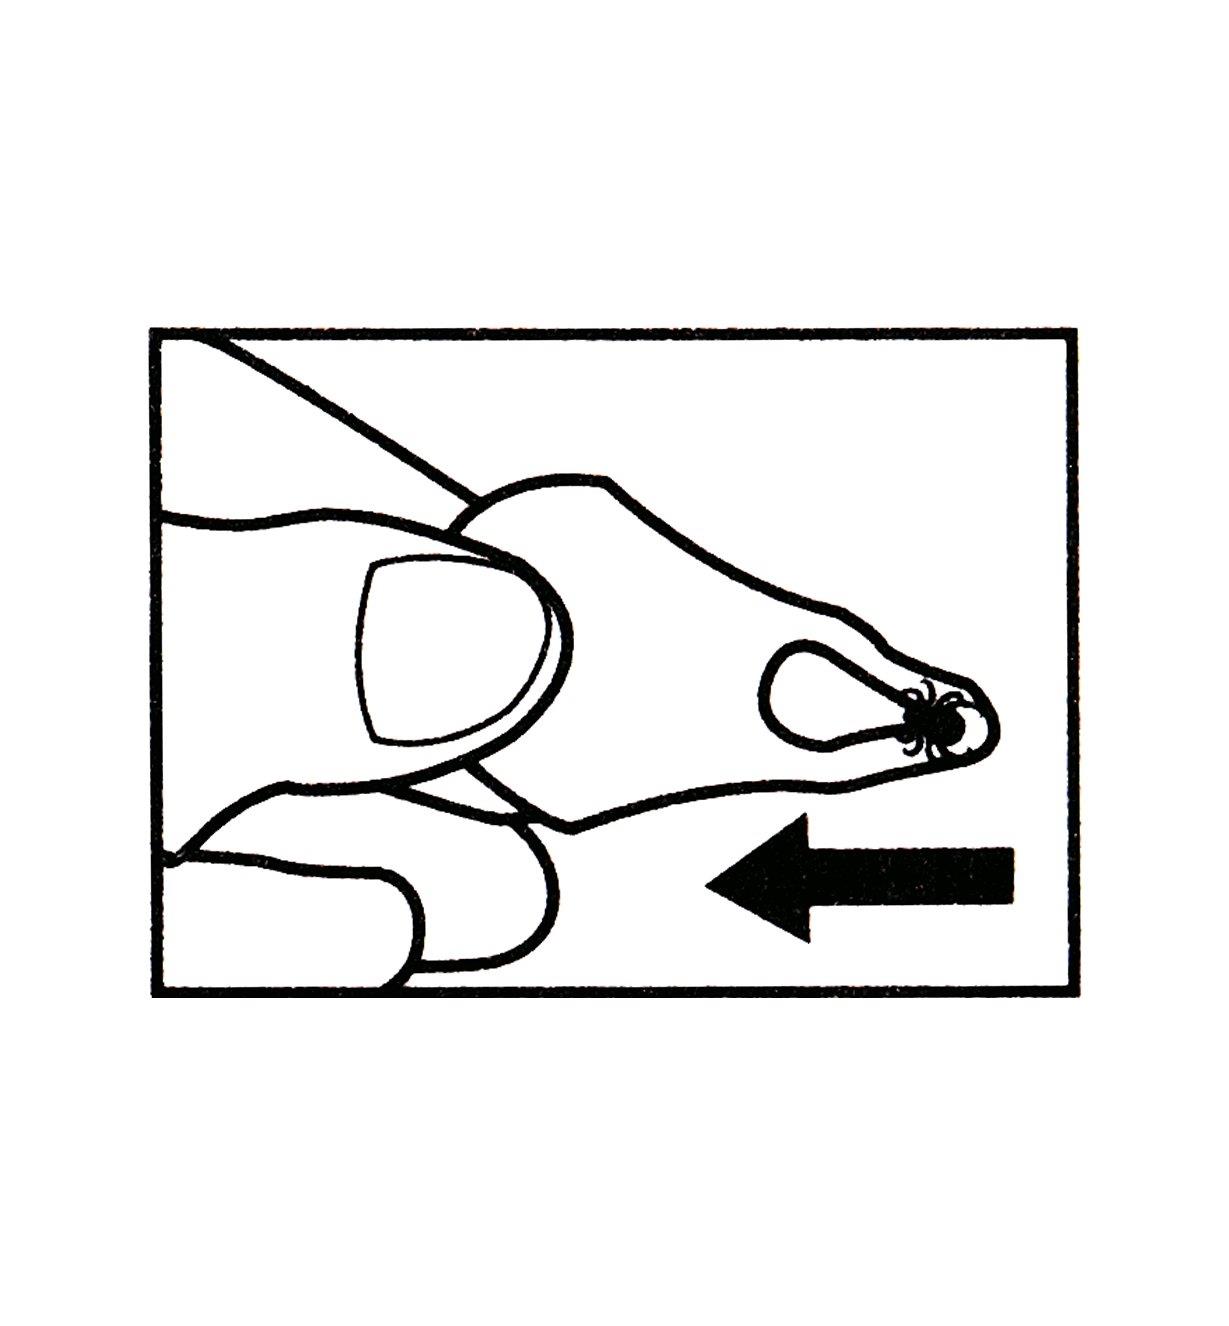 Illustration shows how to slide the tapered slot in the tick key toward the tick